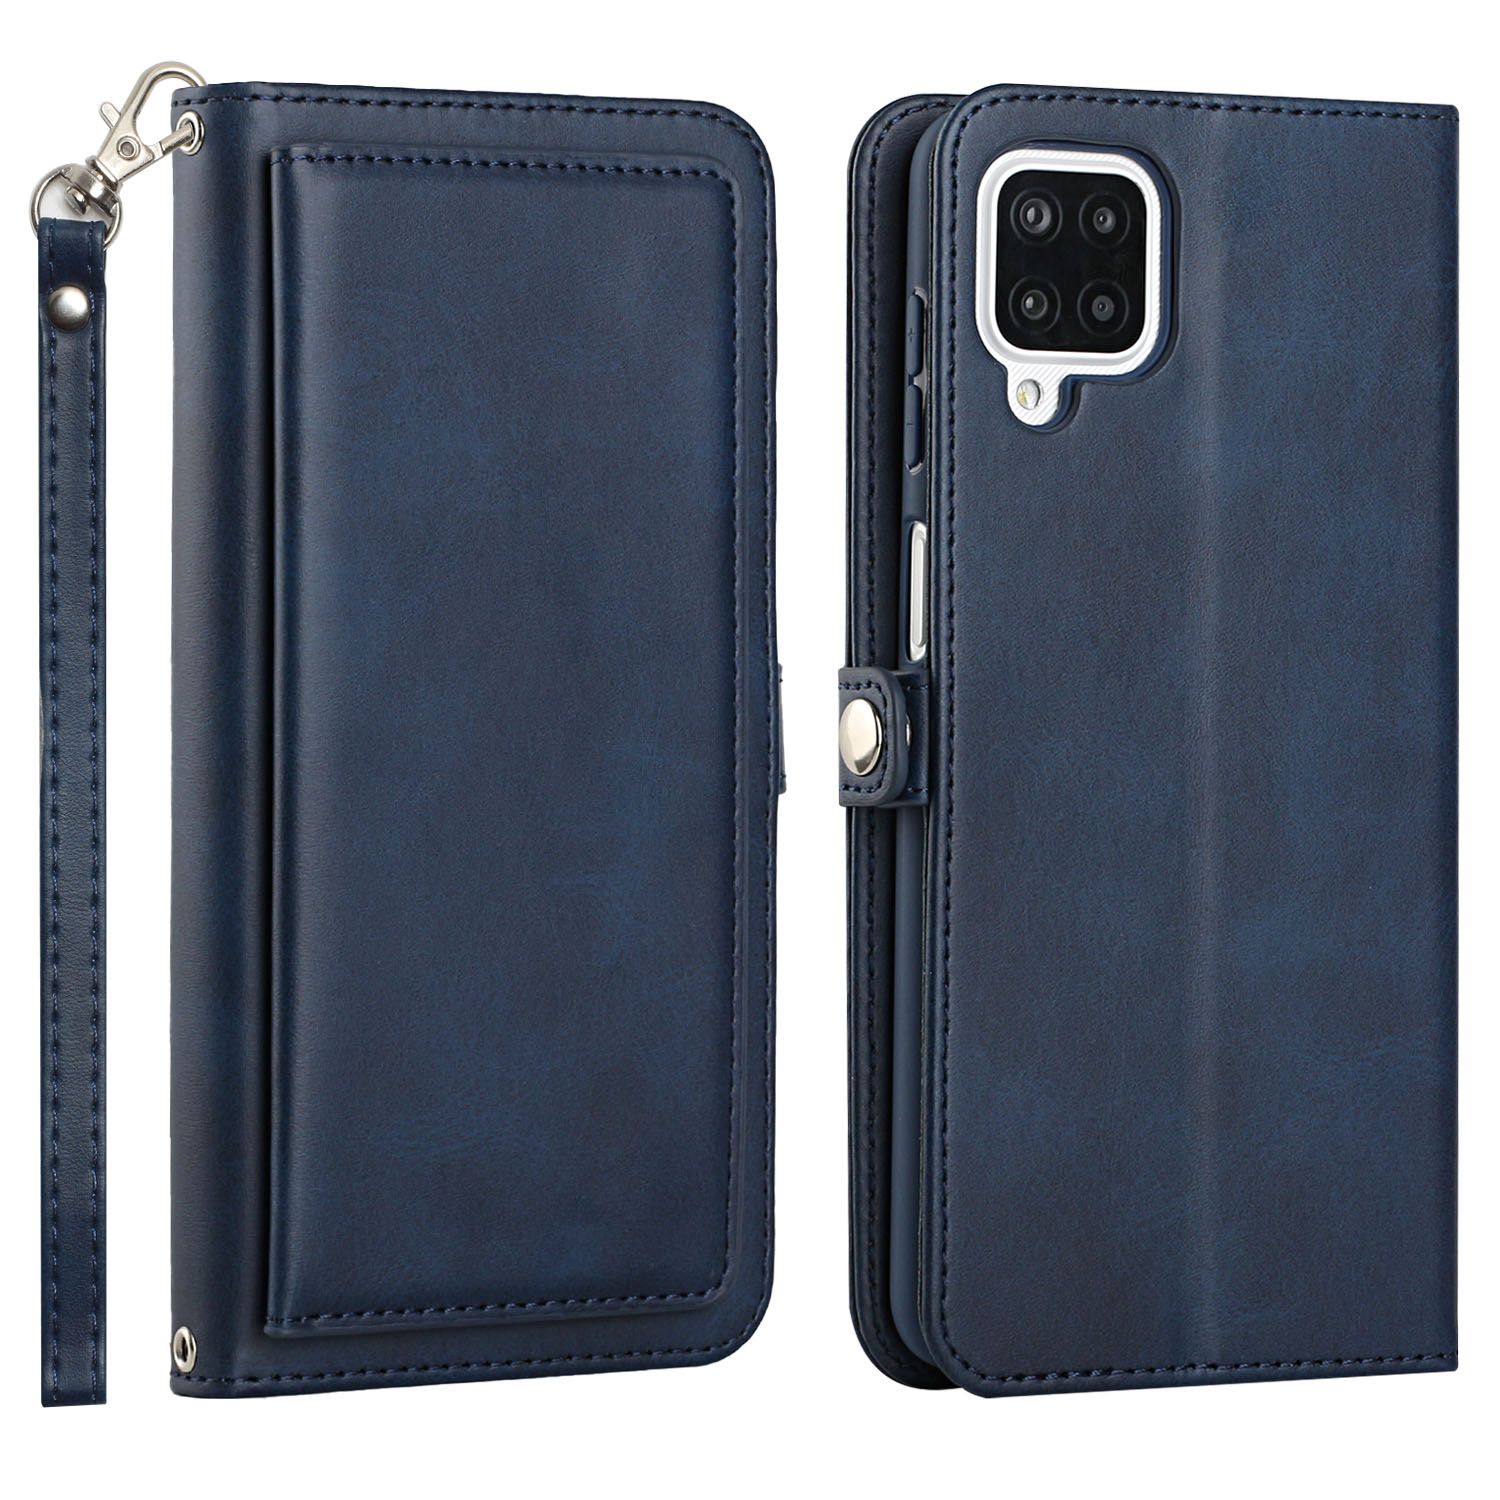 Premium PU Leather Folio WALLET Front Cover Case for Galaxy A12 (Blue)